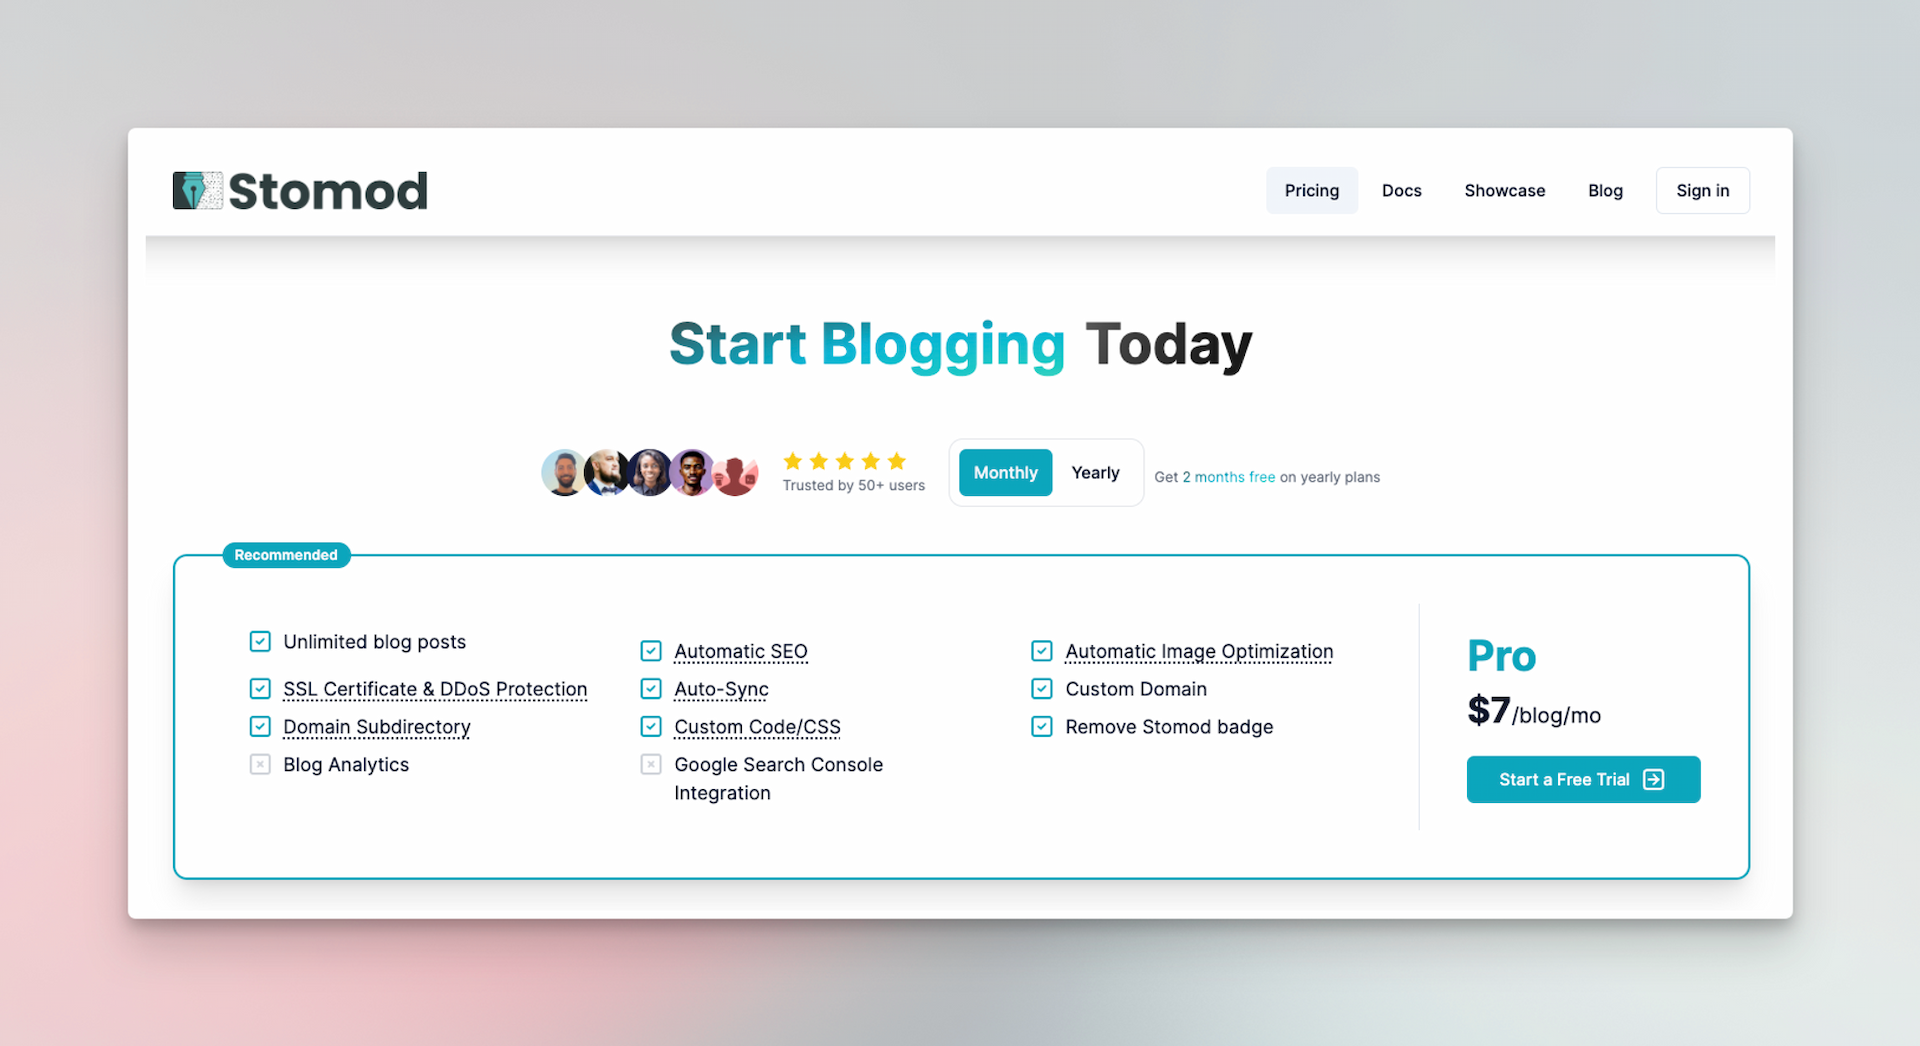 New pricing page layout